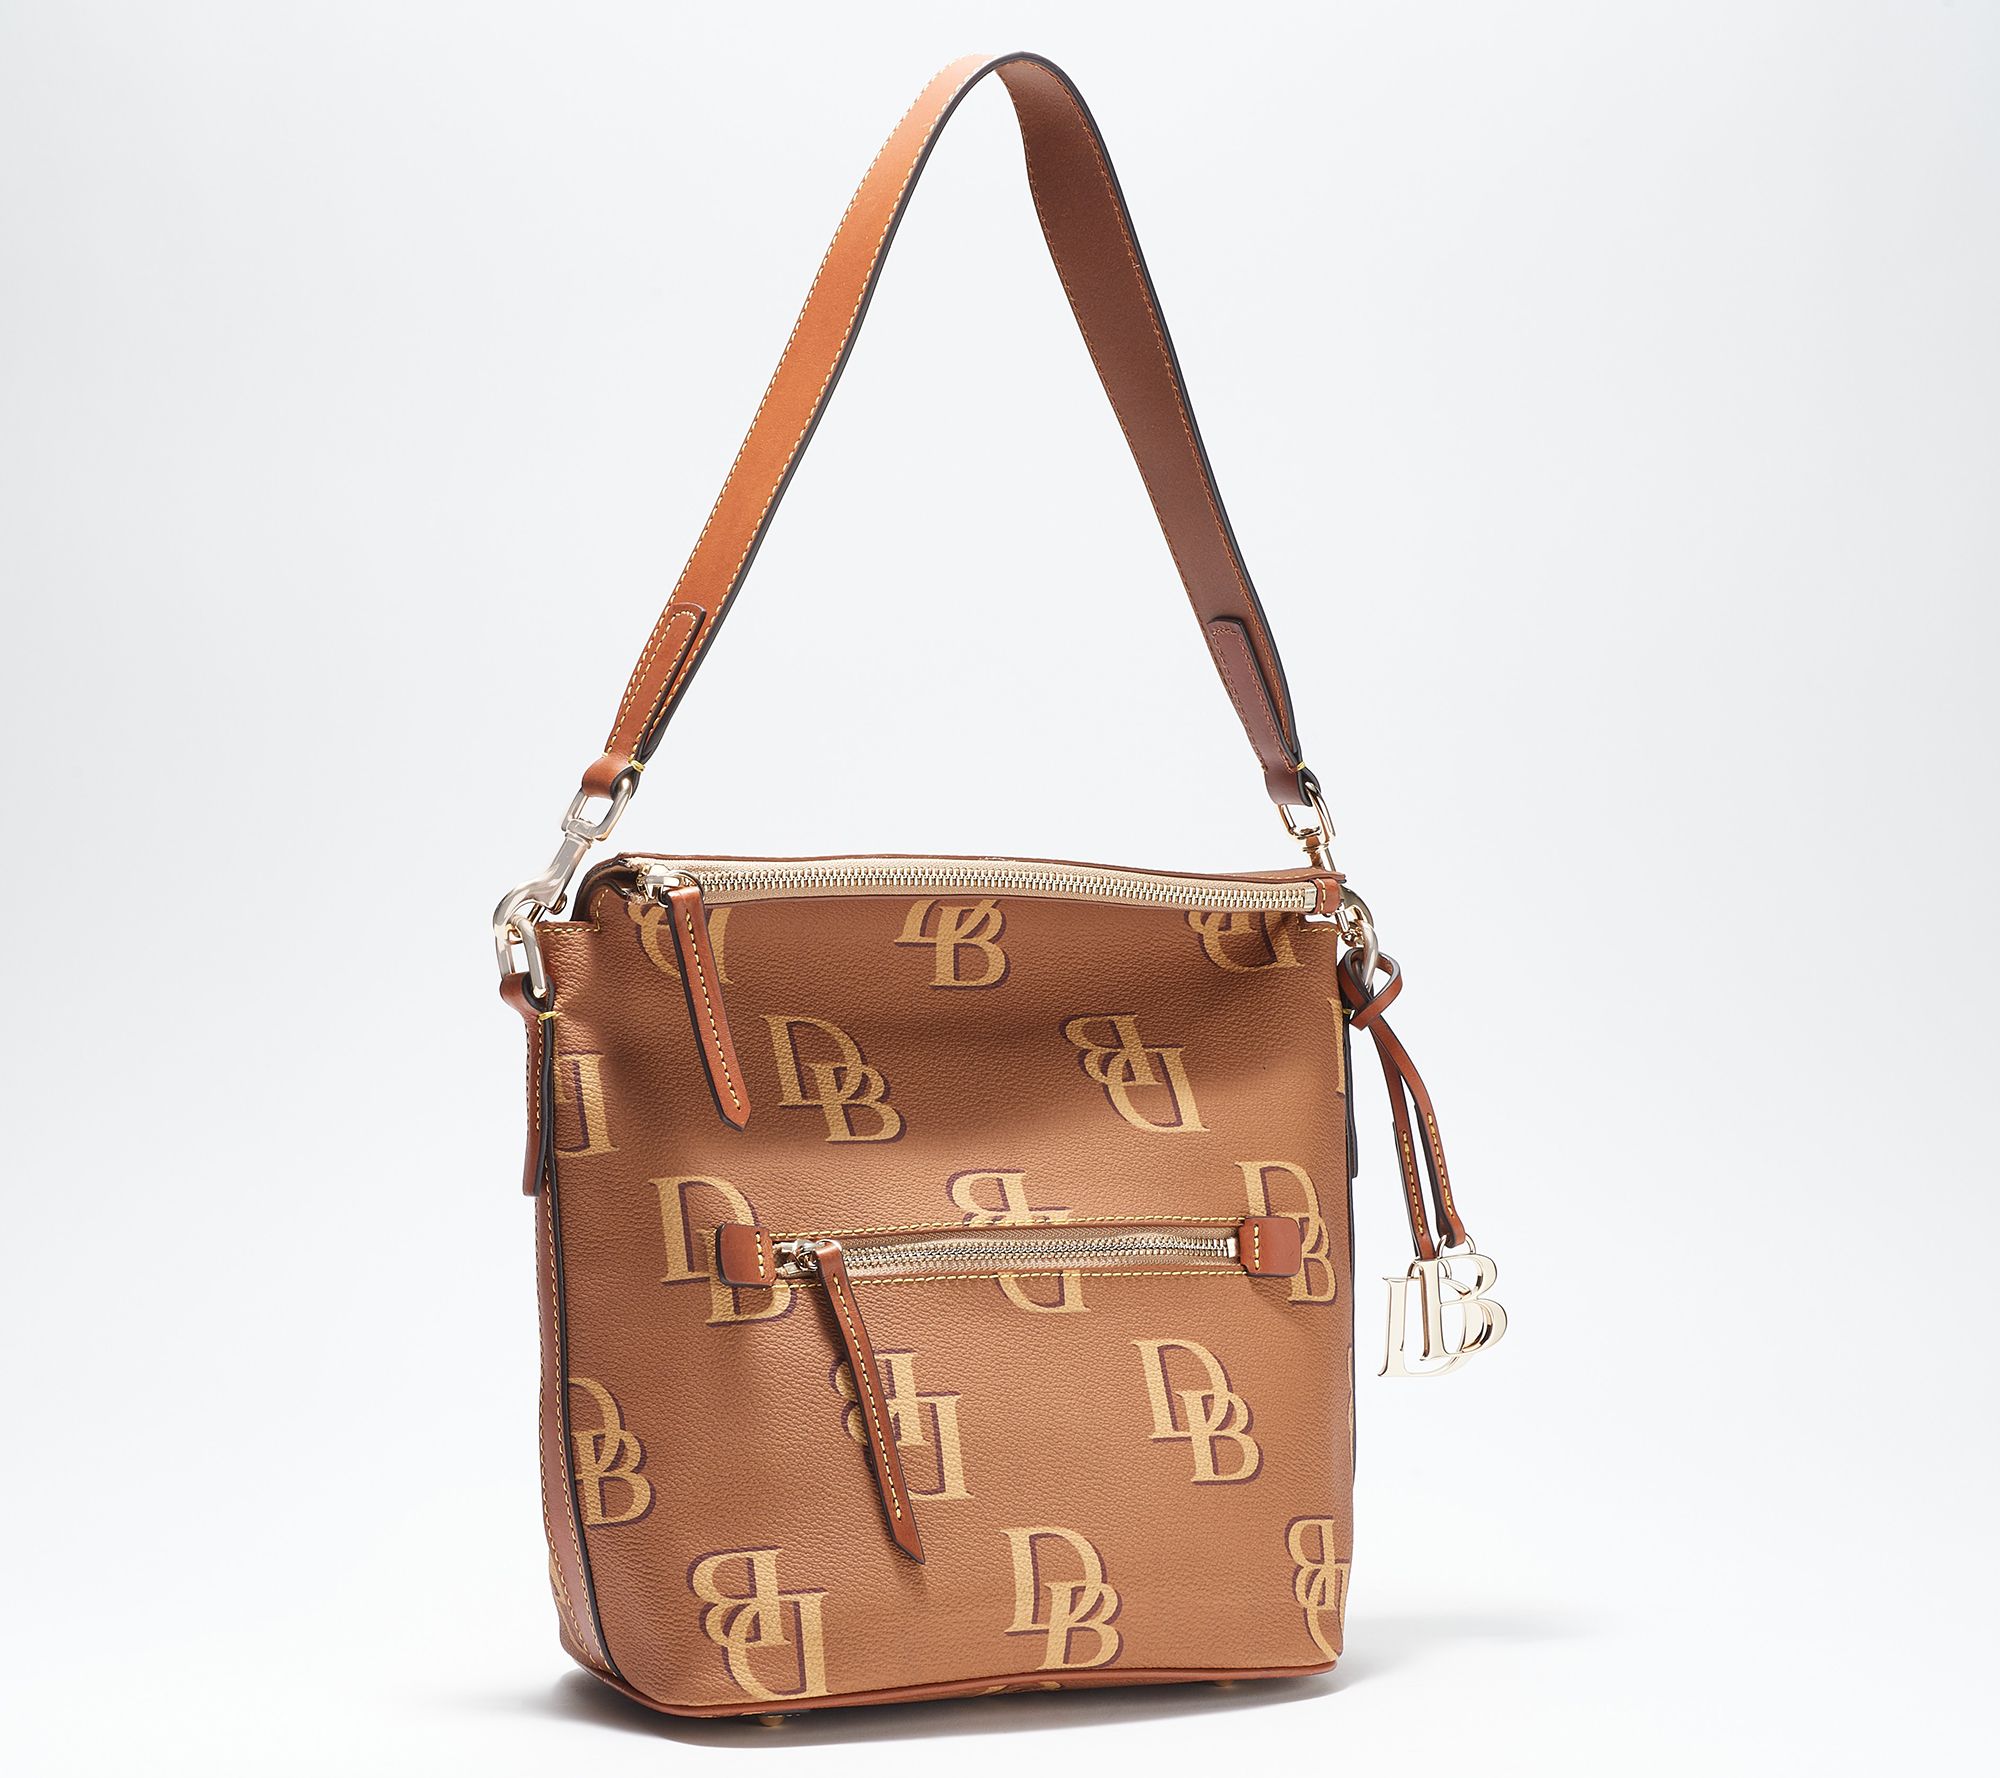 Bow Accent Monogram Print 3 in 1 Tote Handbag Wallet Clutch Purse Set One Size / Brown